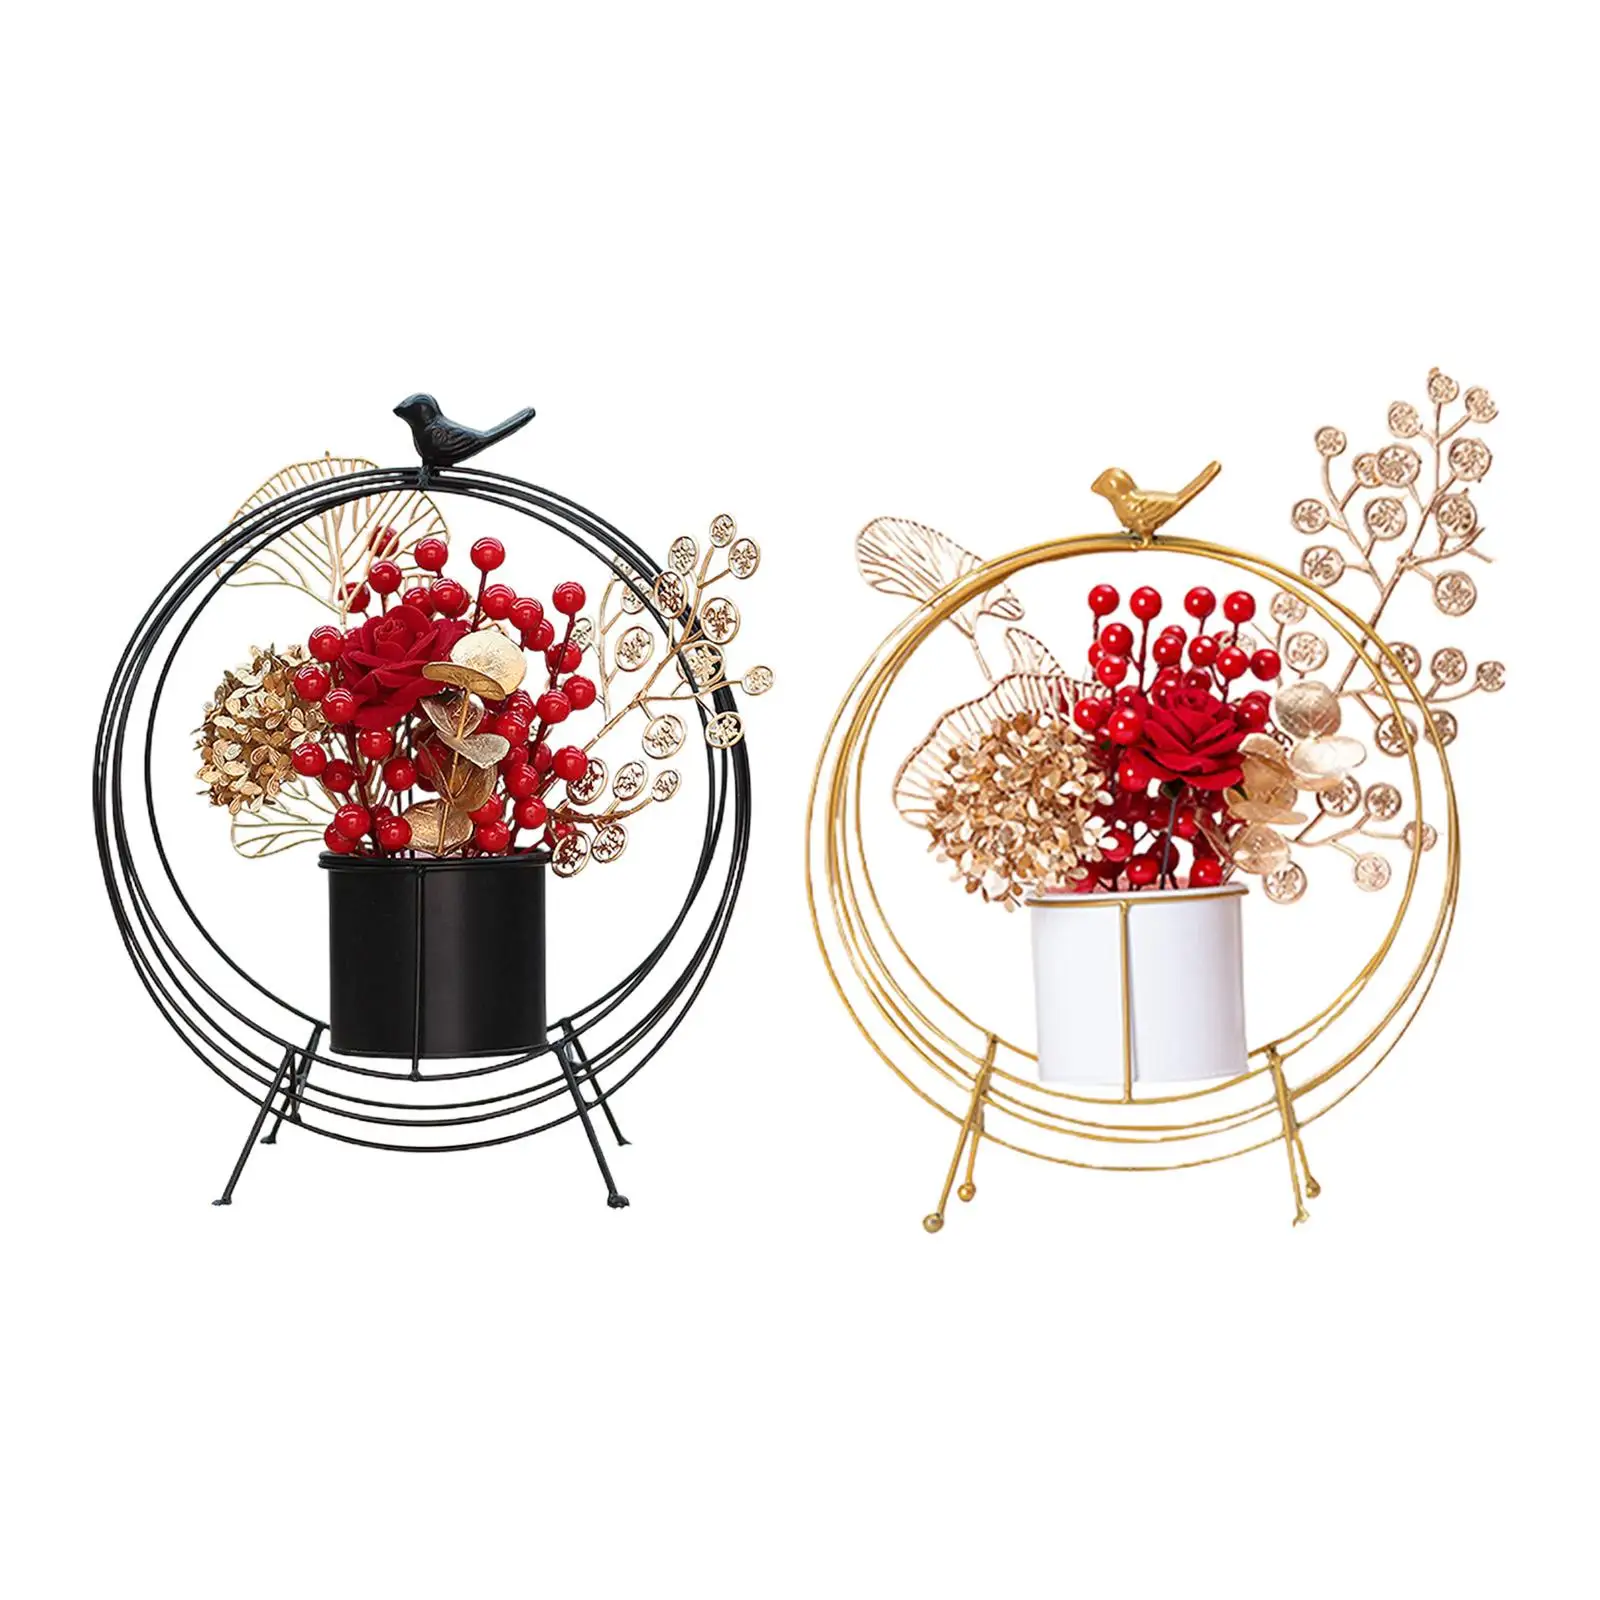 New Year Flower Basket Decoration Photo Props Red Berries Fall Ornament for Spring Festival Party Home Autumn Thanksgiving